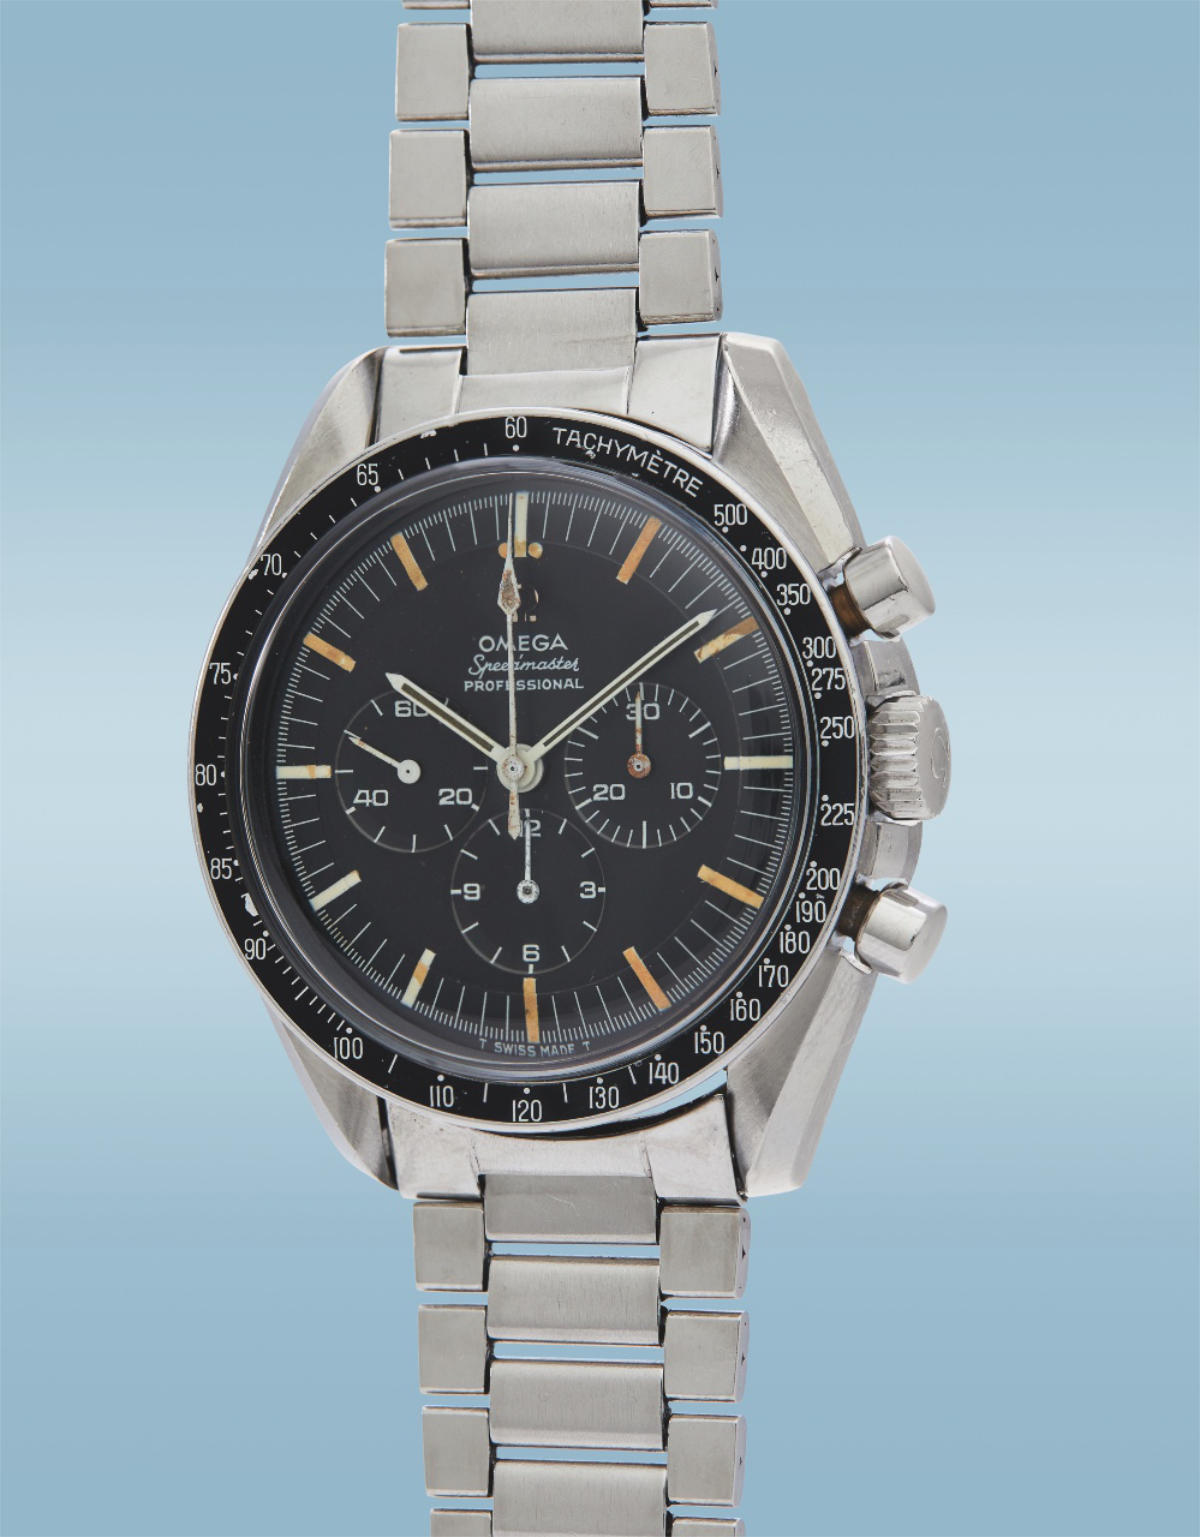 Ralph Ellison’s Speedmaster Watch Is Acquired By OMEGA At Auction